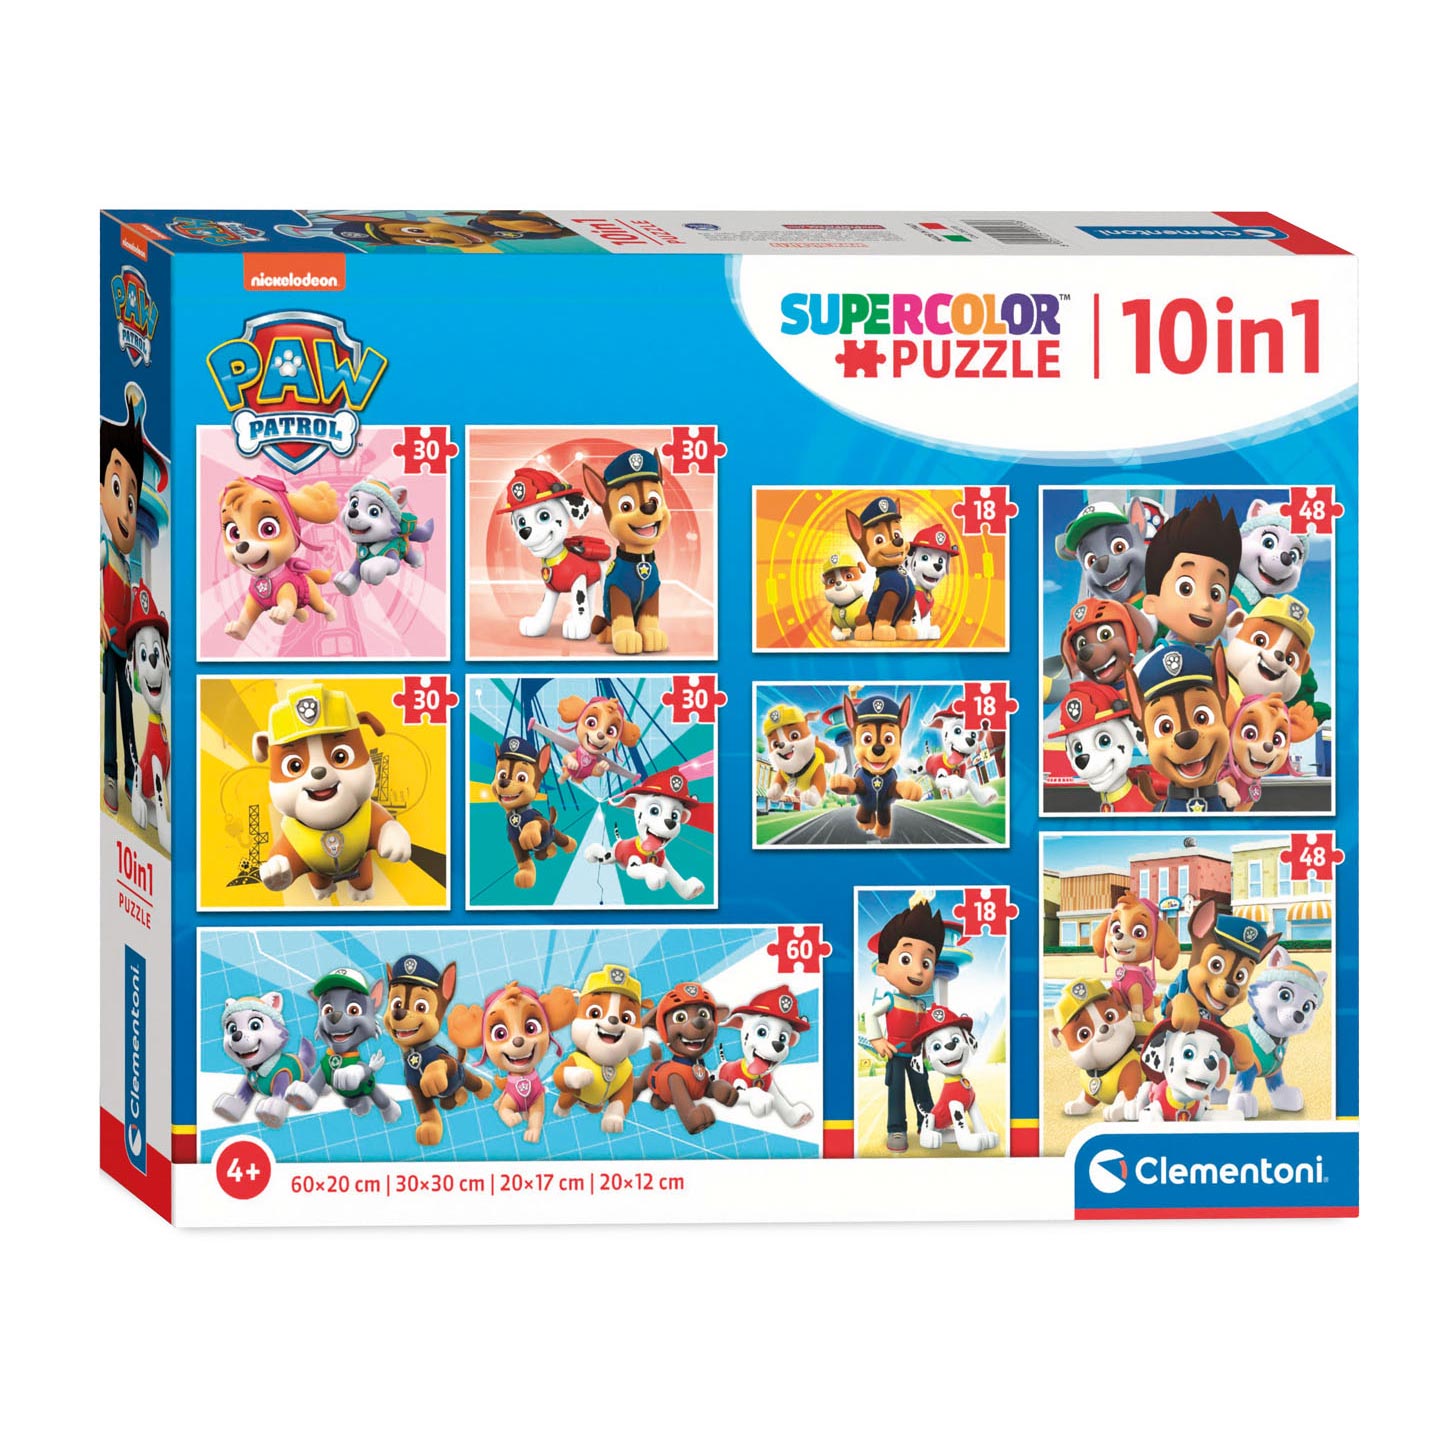 Clementoni Puzzels Paw Patrol, 10in1